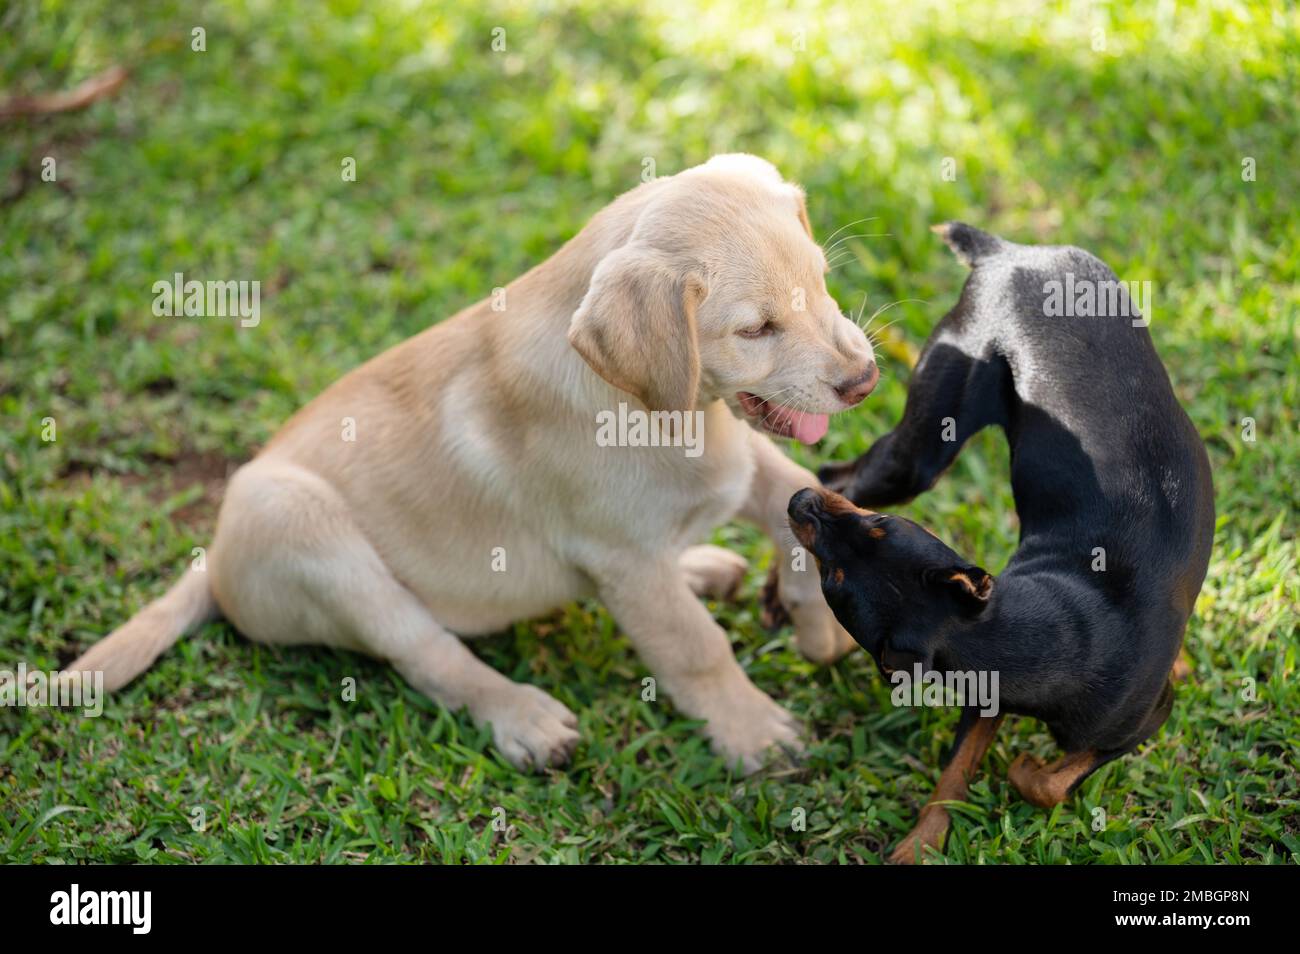 Playful two puppies dogs on sunny grass yard background Stock Photo